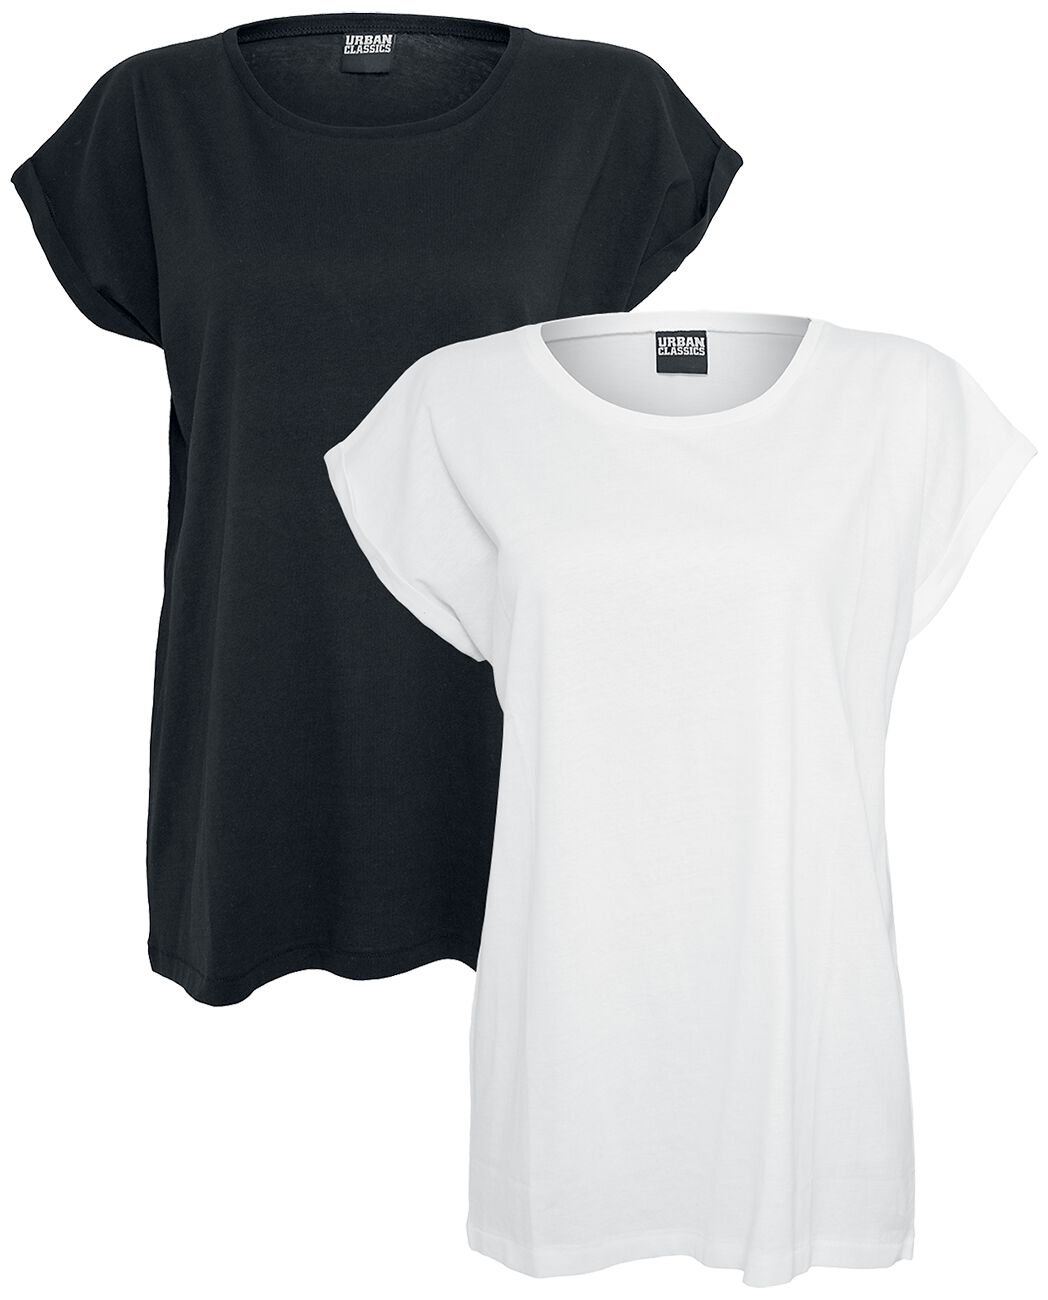 Image of Urban Classics Ladies Extended Shoulder Tee Double Pack Girl-Shirt schwarz/weiß